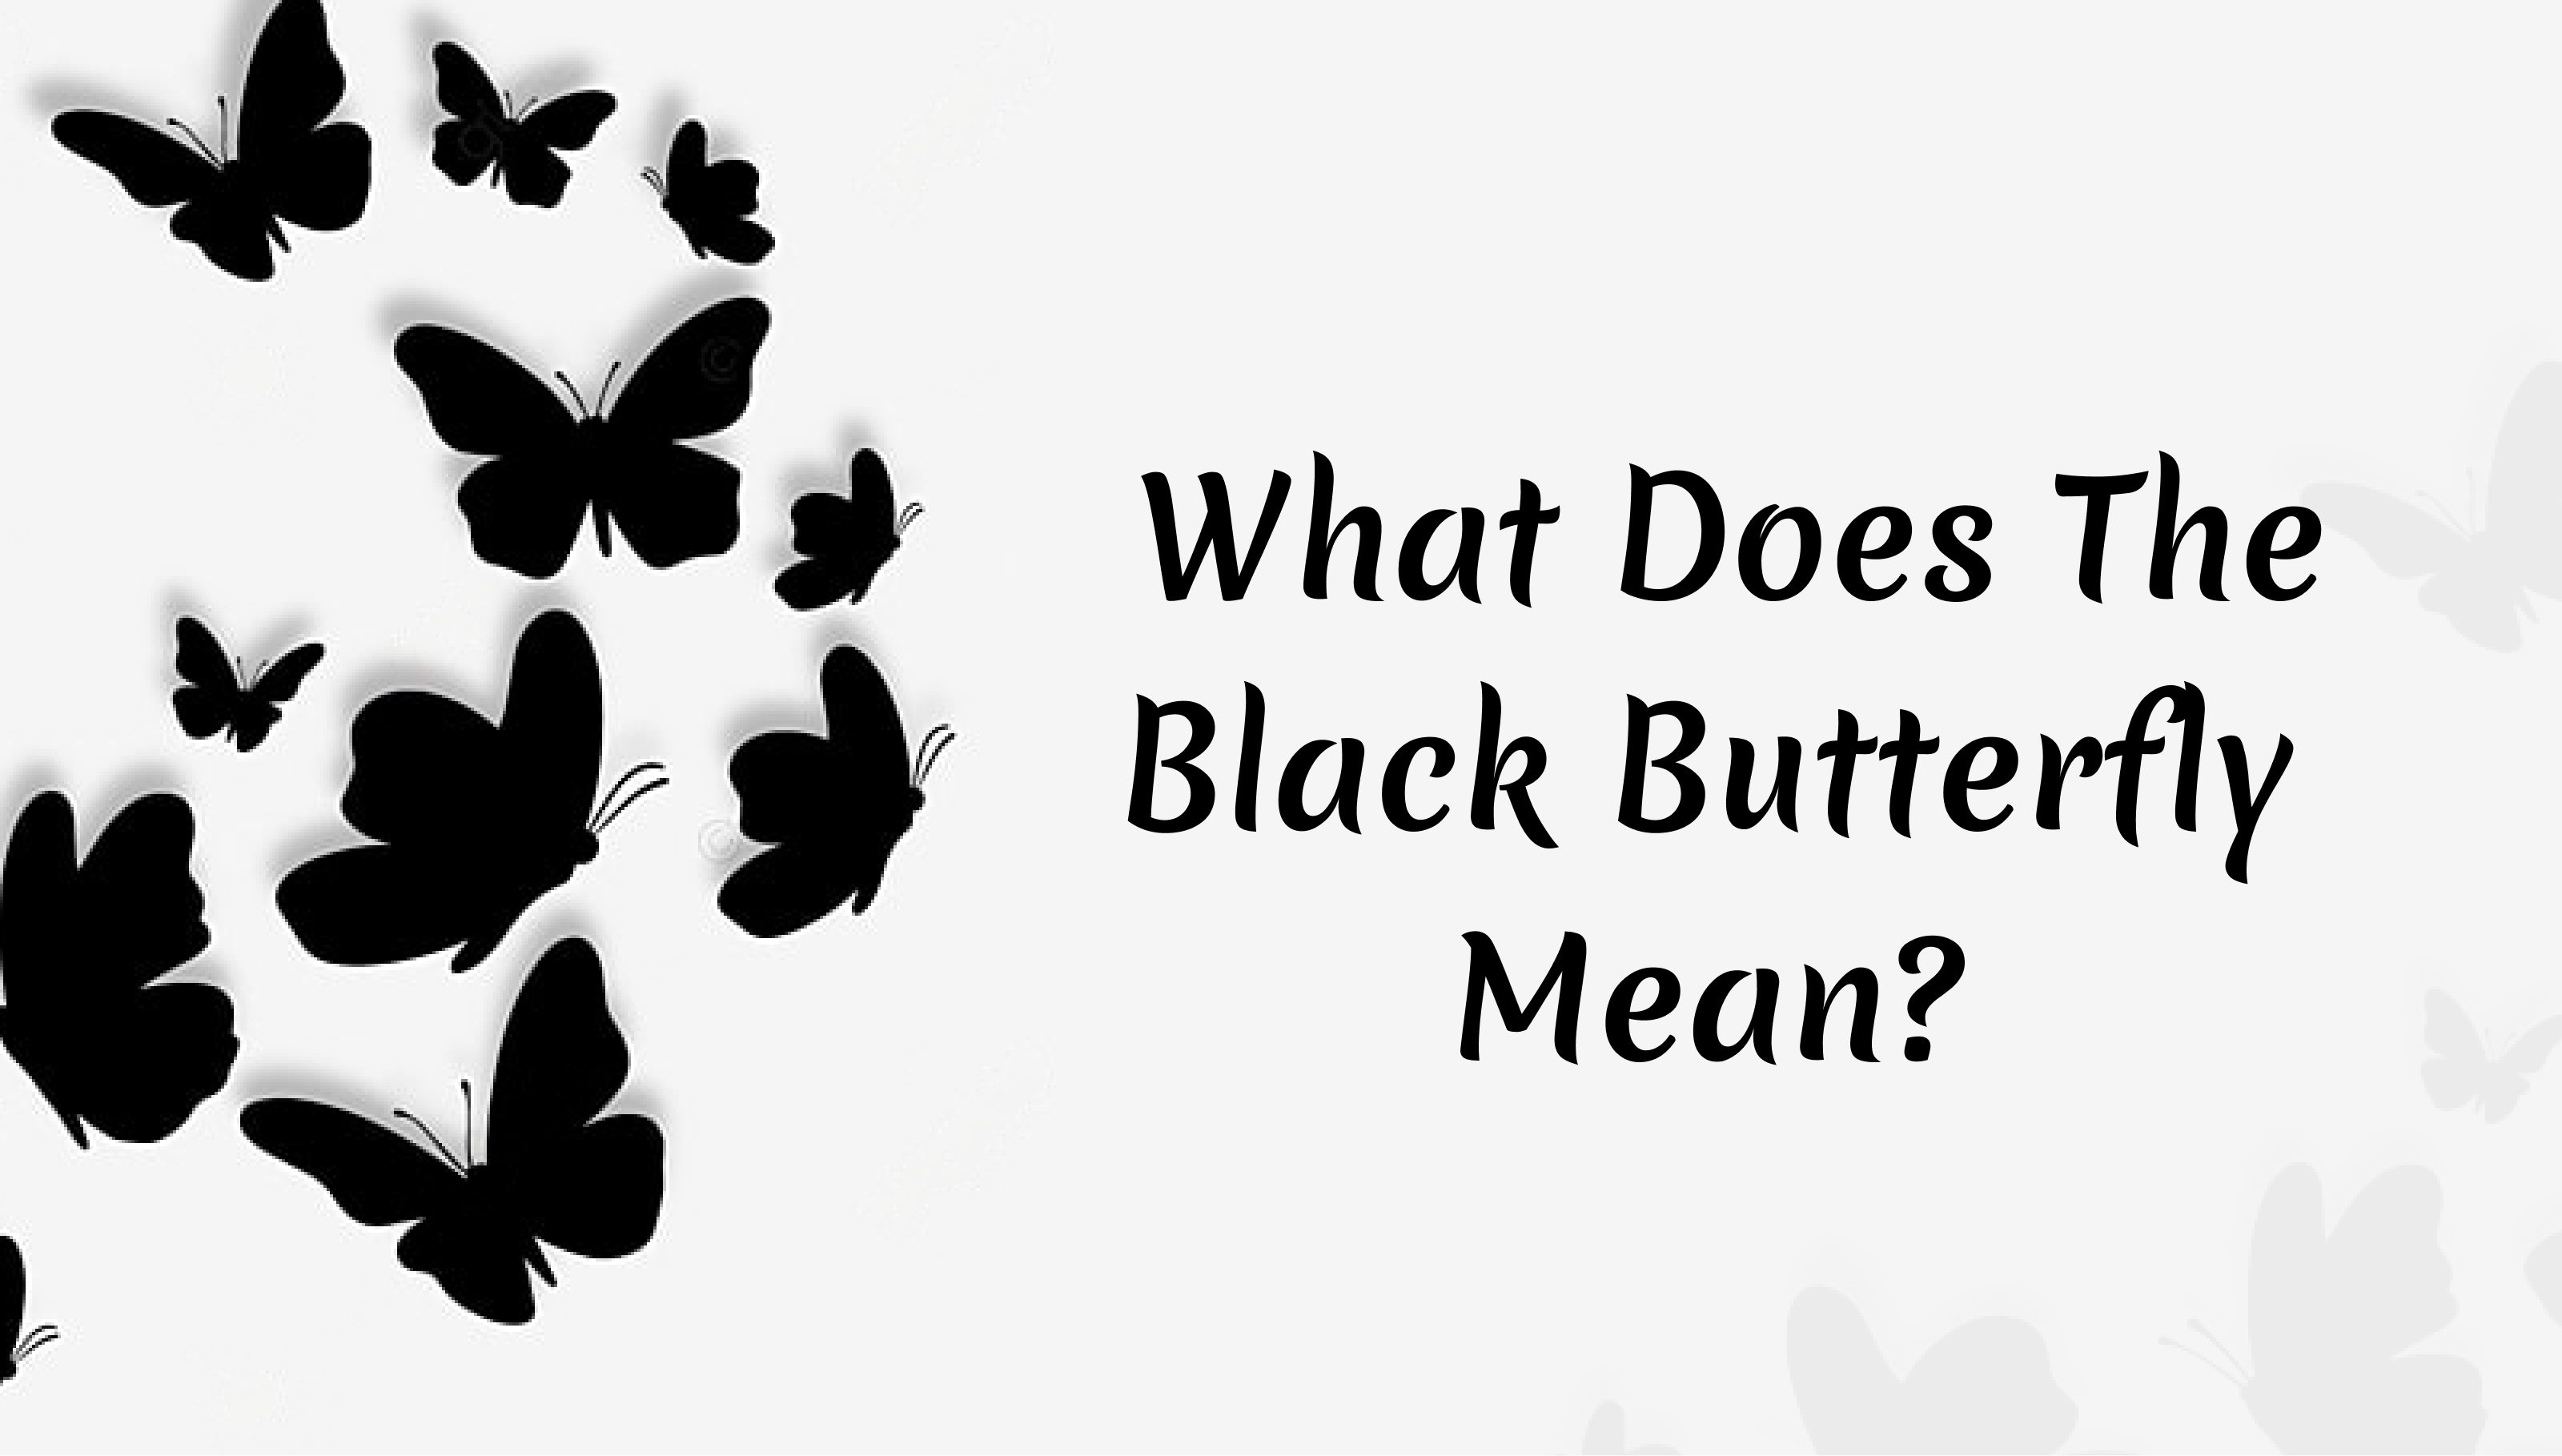 What does a black butterfly meaning?